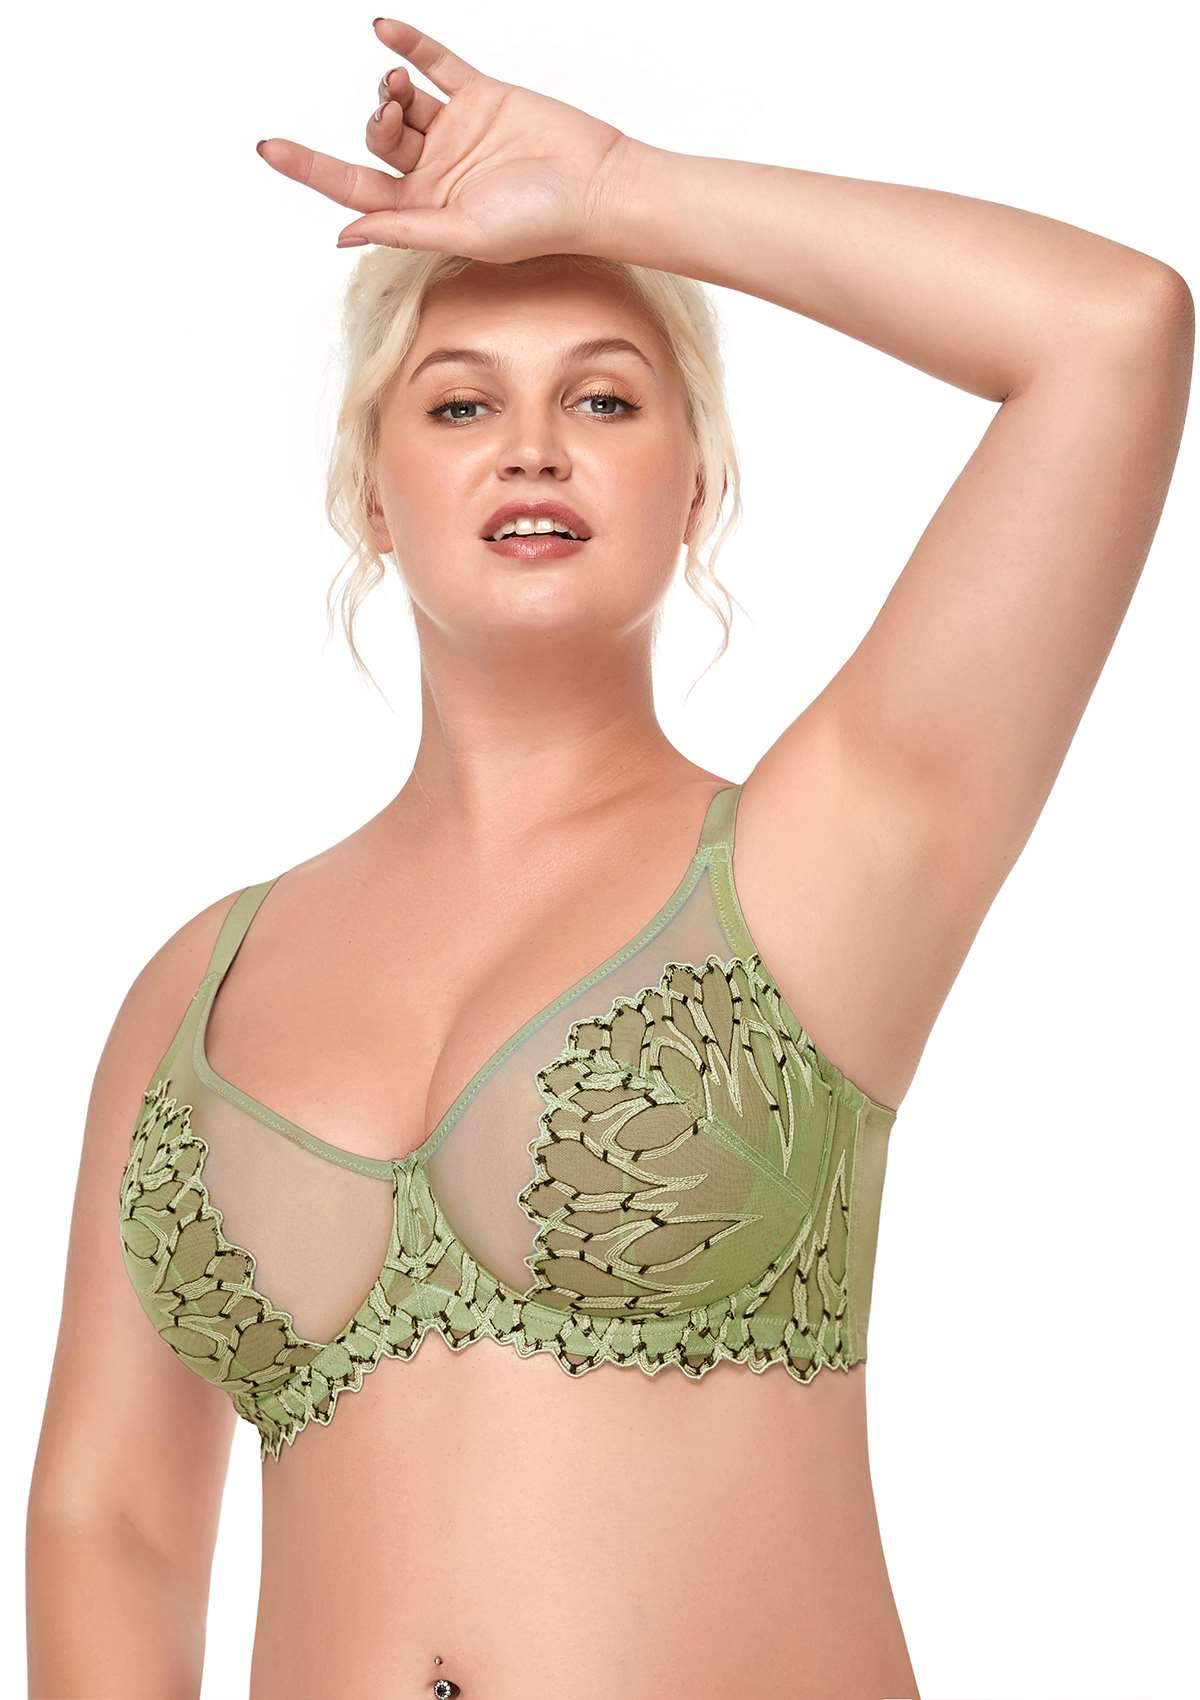 HSIA Chrysanthemum Floral Embroidered Bra: Lace Sheer Unpadded Bra - Green / 34 / C